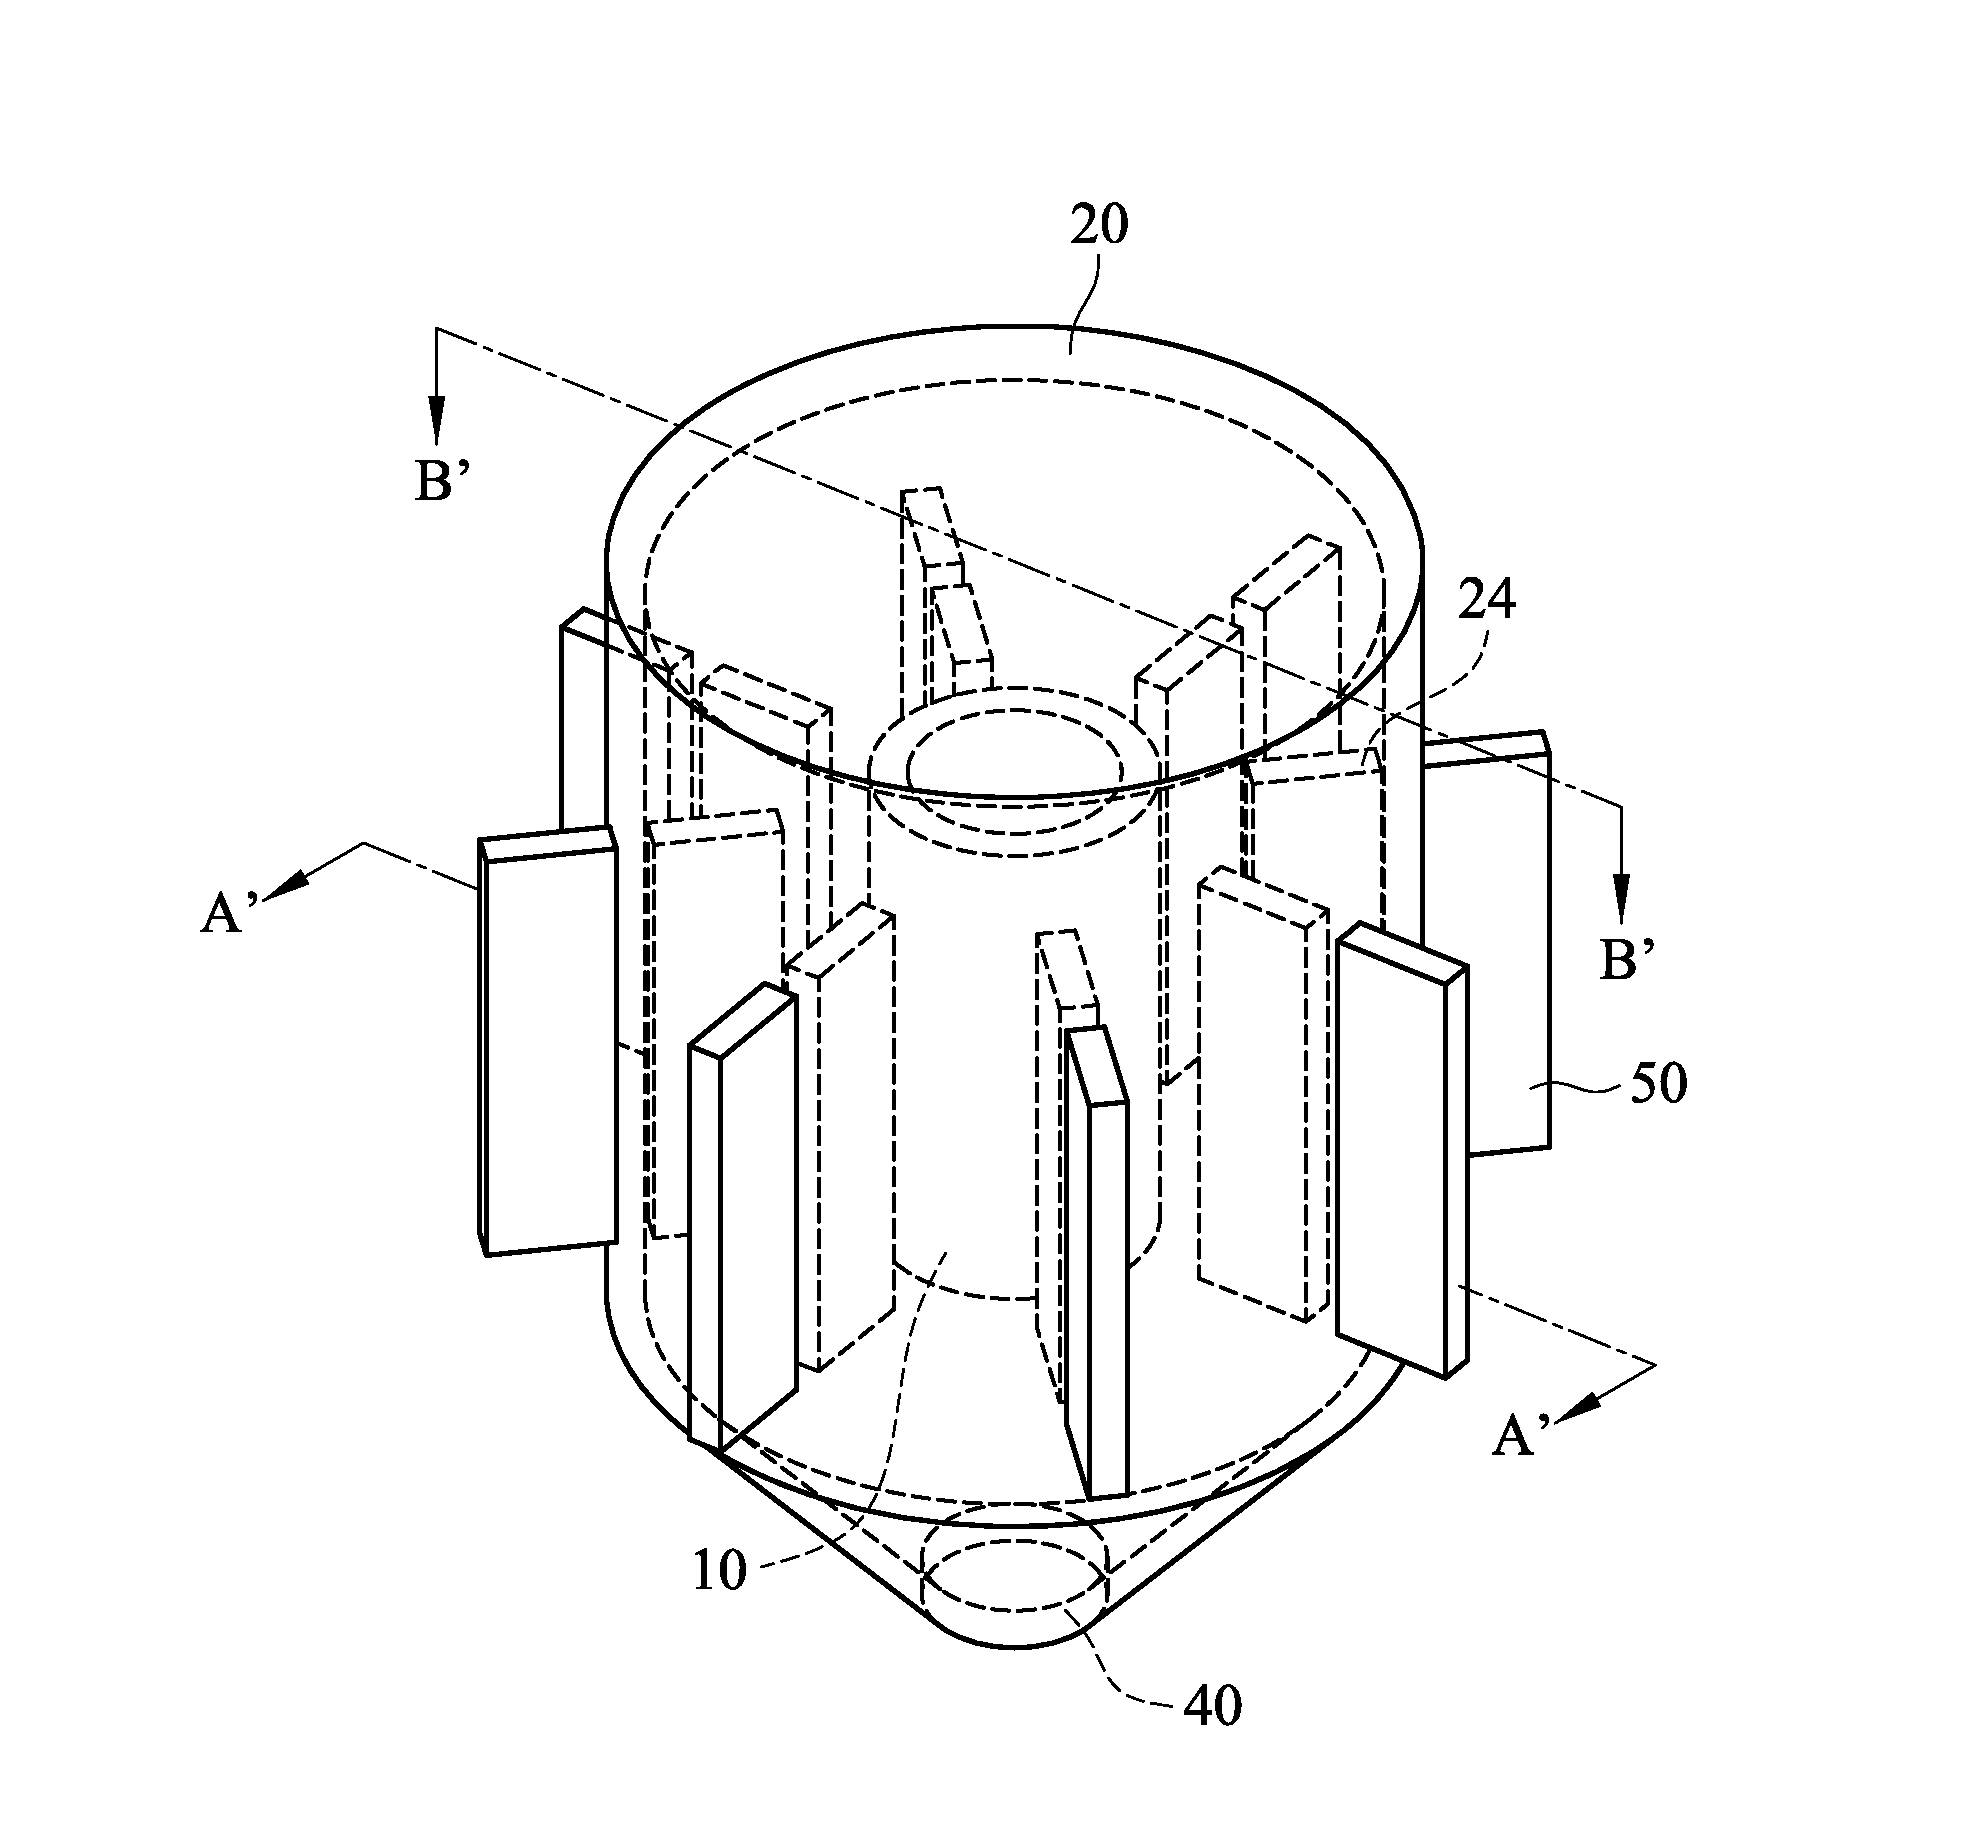 Cooling apparatus using solid-liquid phase change material